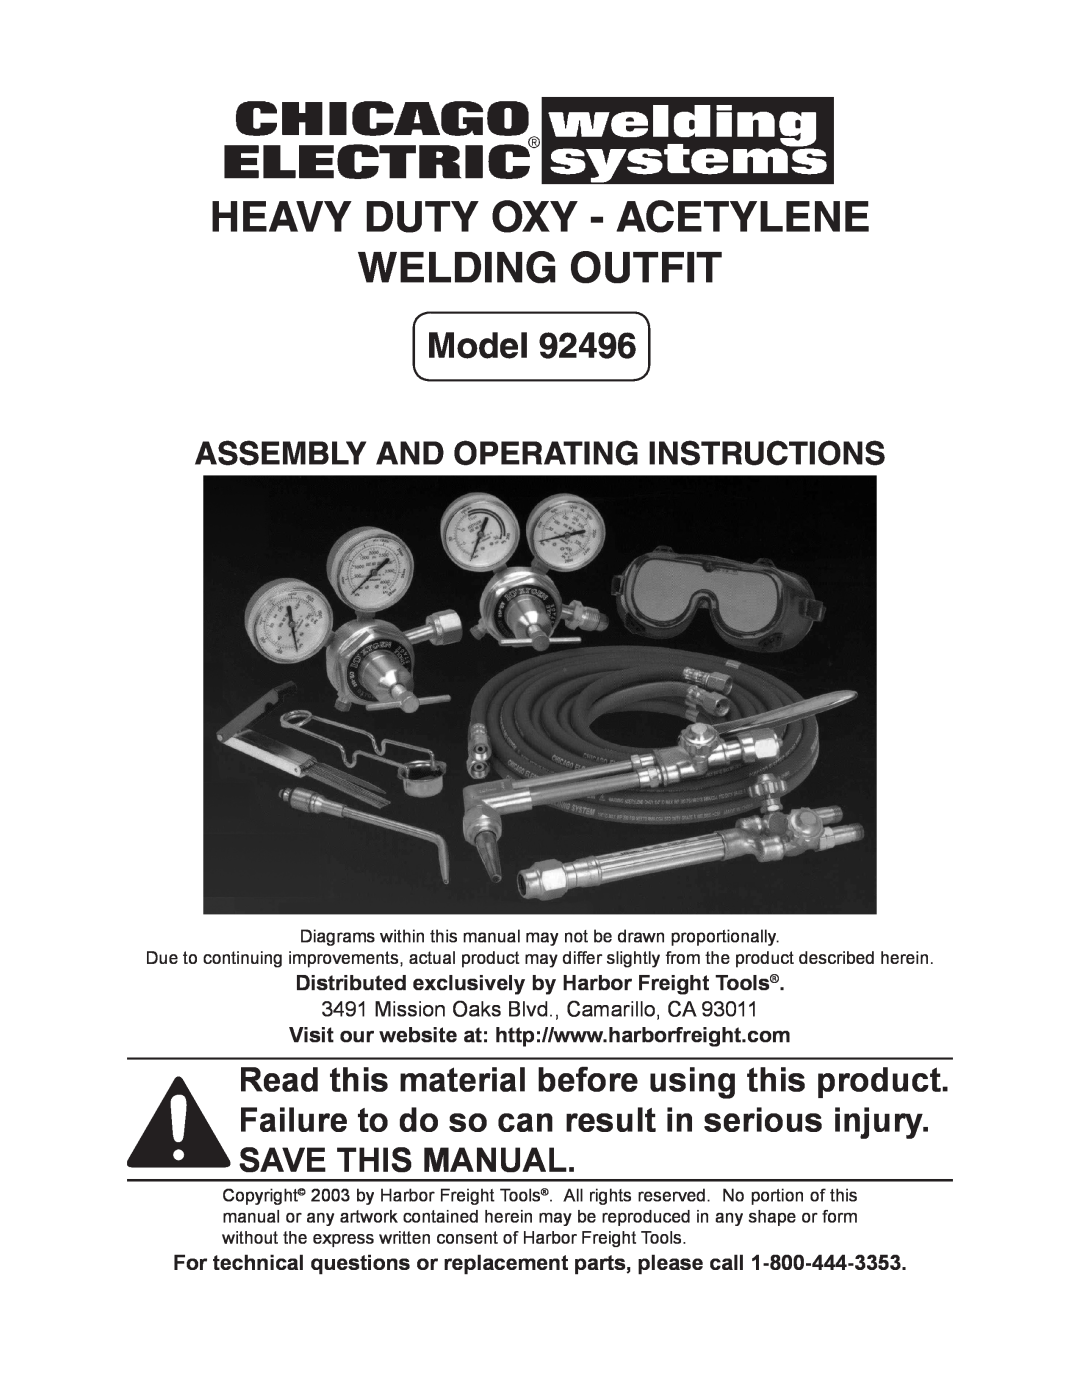 Chicago Electric 92496 operating instructions HEAVY DUTY Oxy - Acetylene WELDING Outfit, Model 